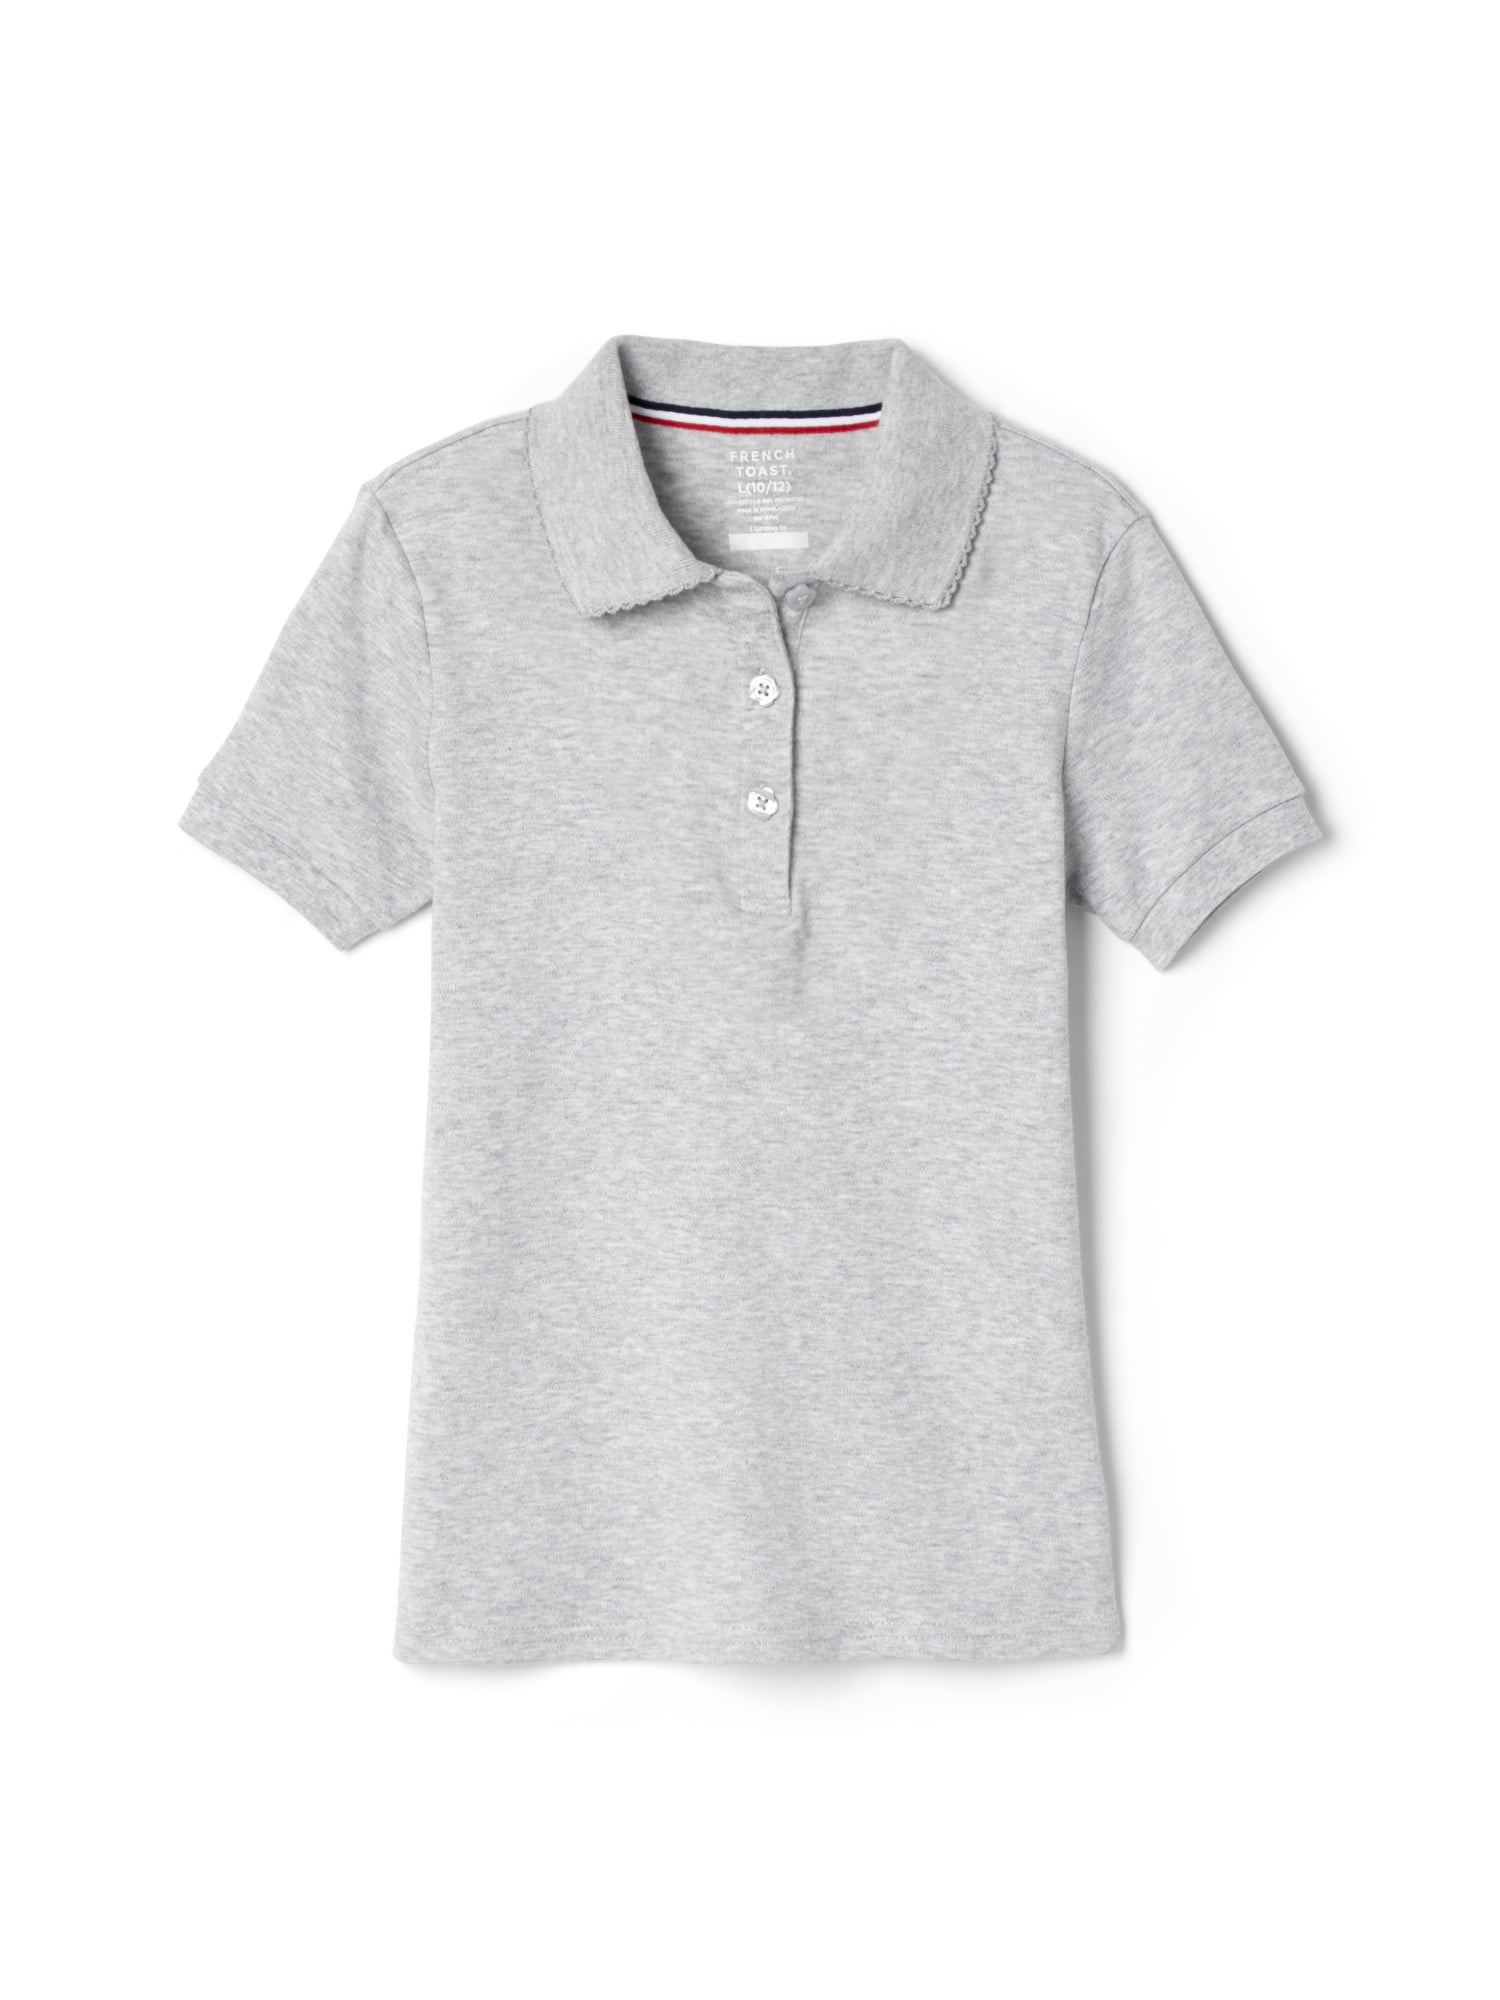 French Toast Girls Polo Shirt 